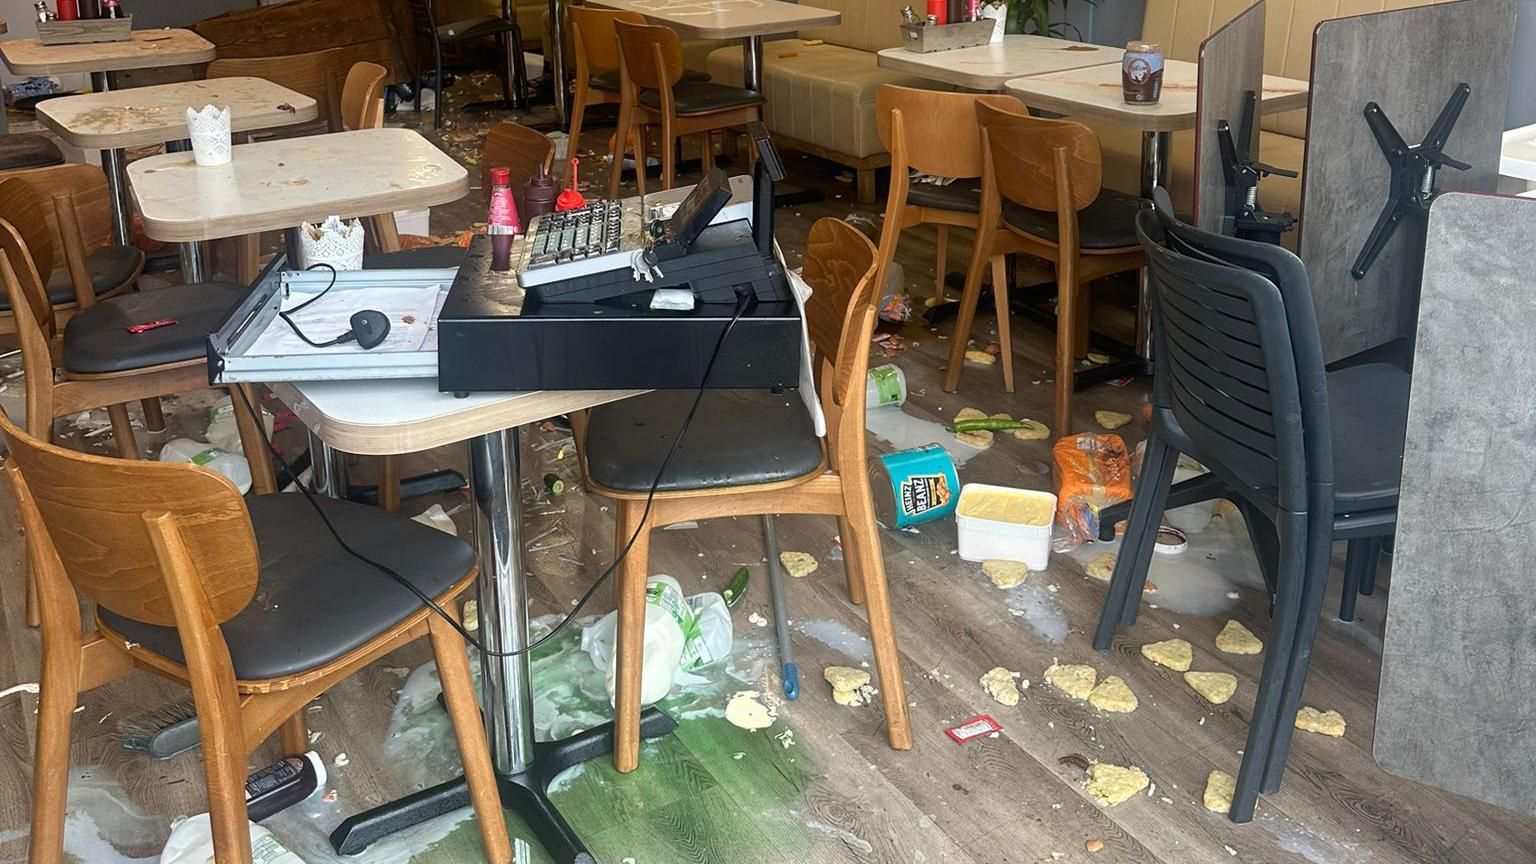 Food, drink and mess on the floor of the cafe, with the till dragged on to a table